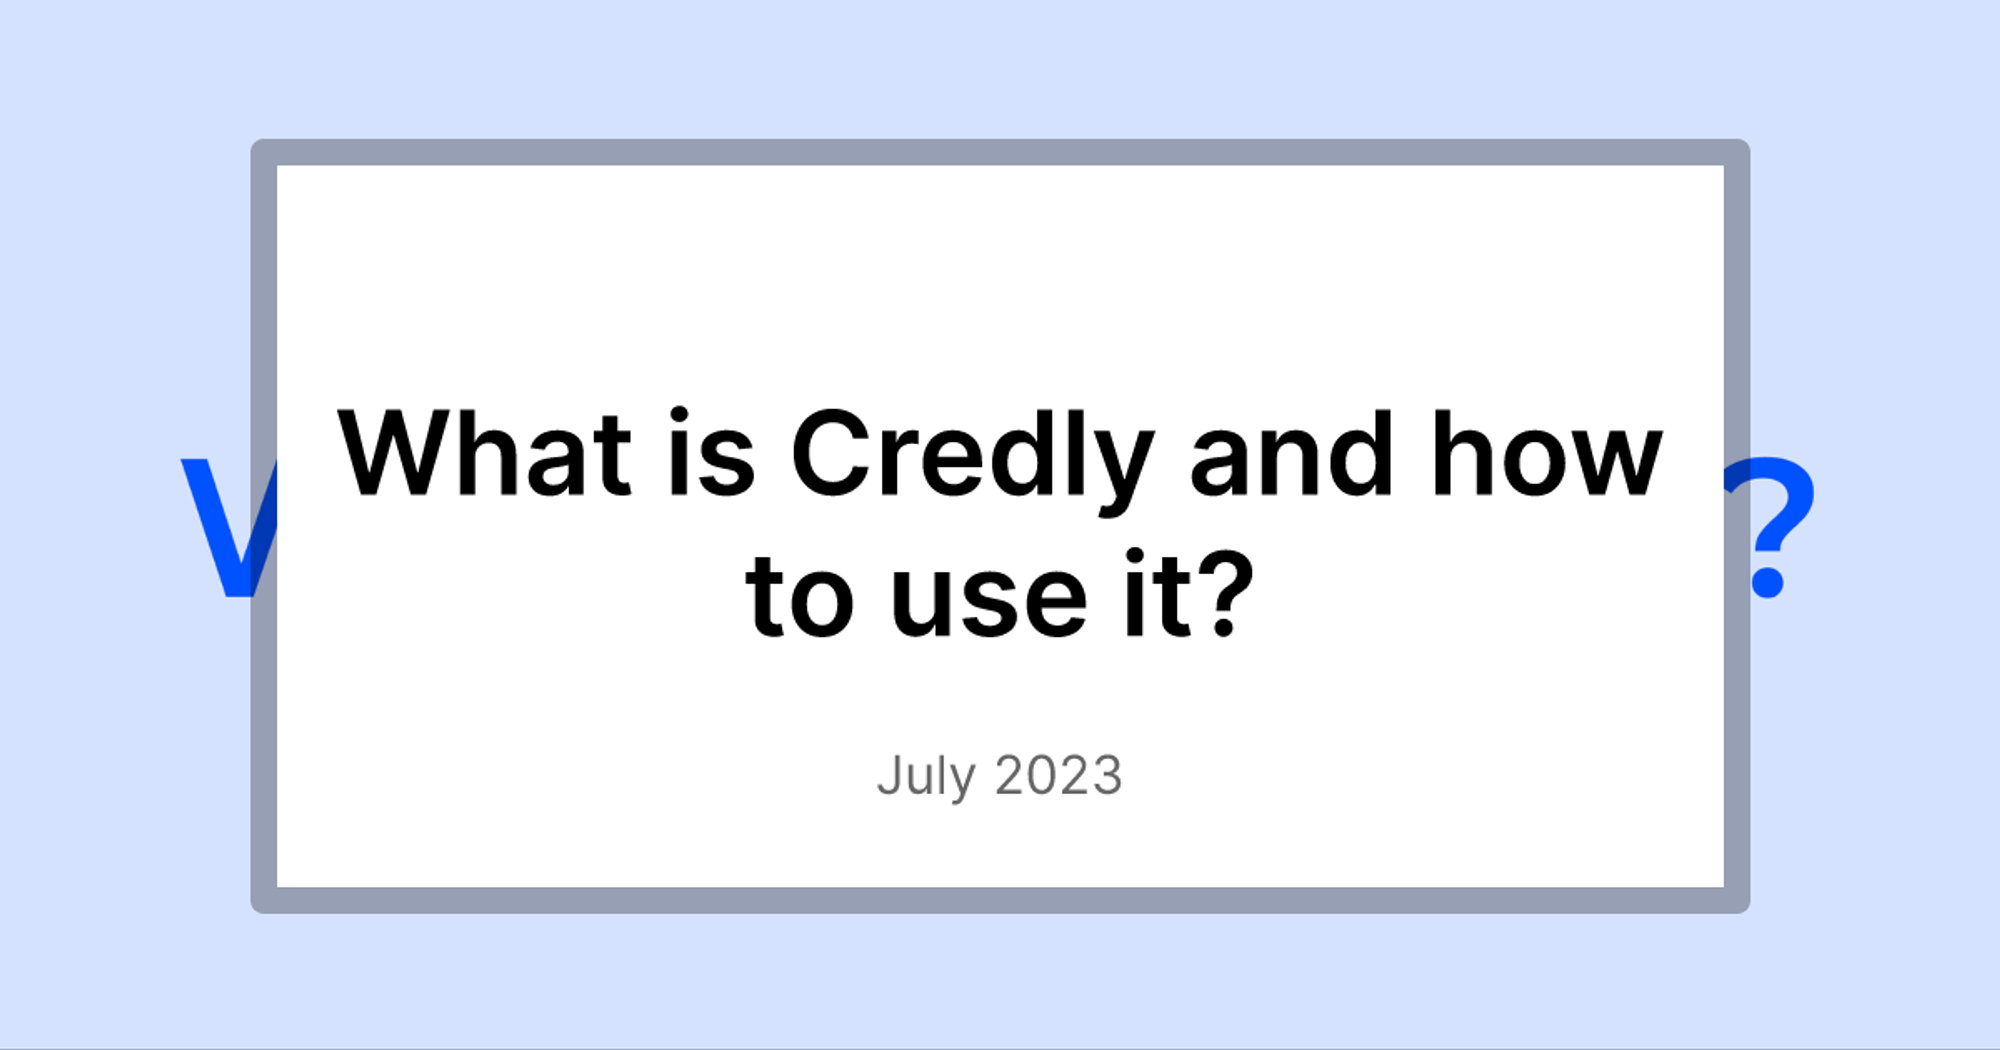 What is Credly and how to use it?